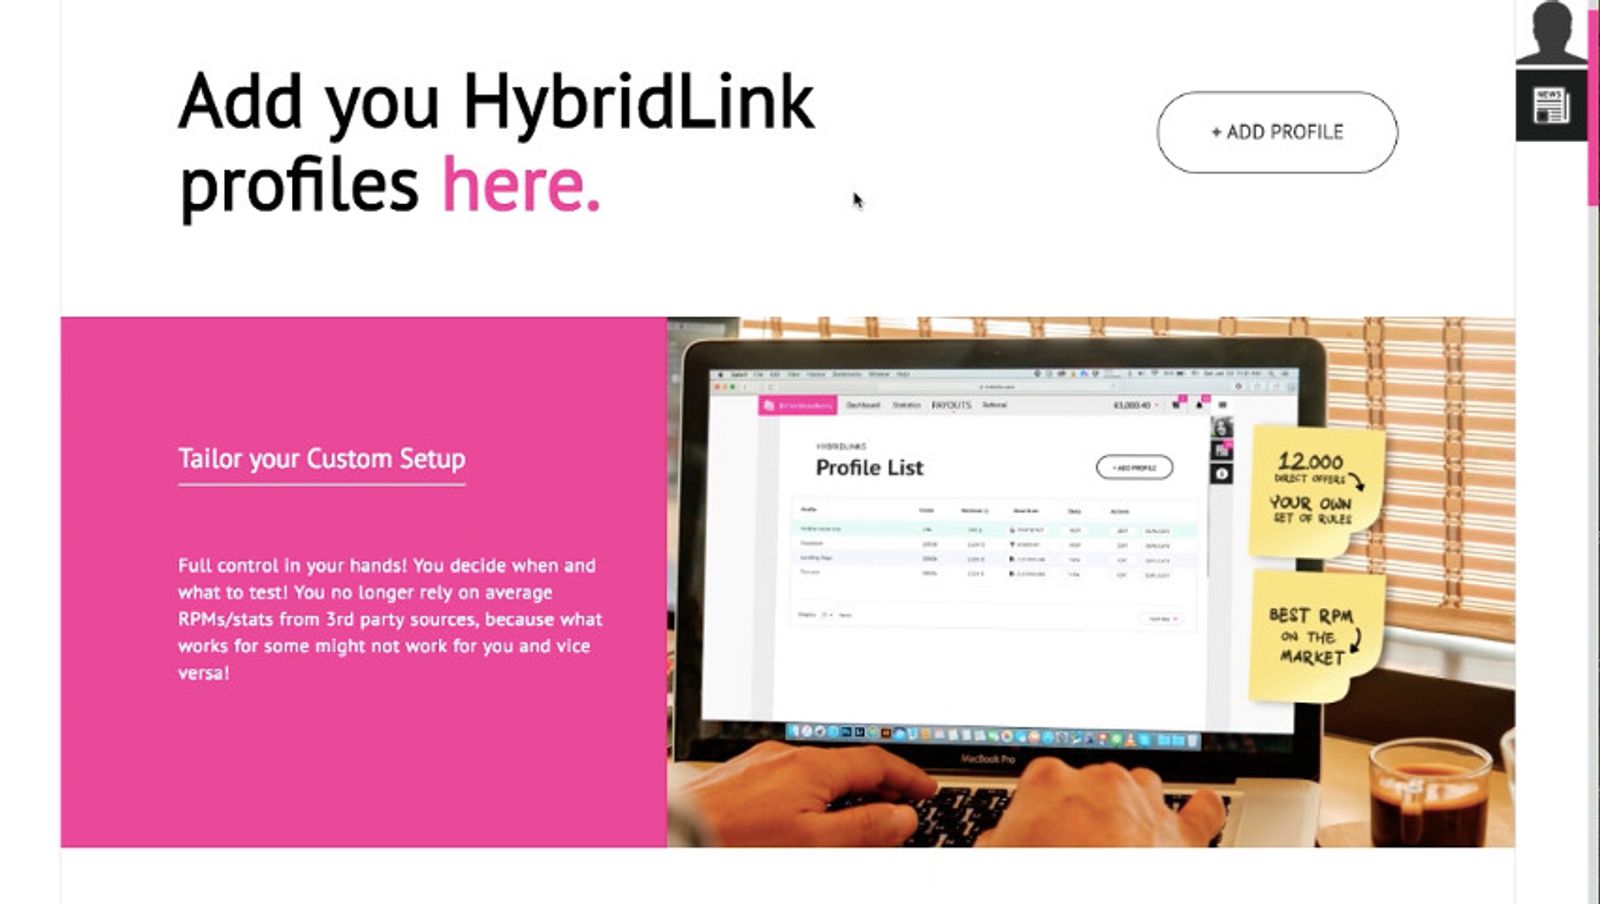 BitterStrawberry.com Launches HybridLink